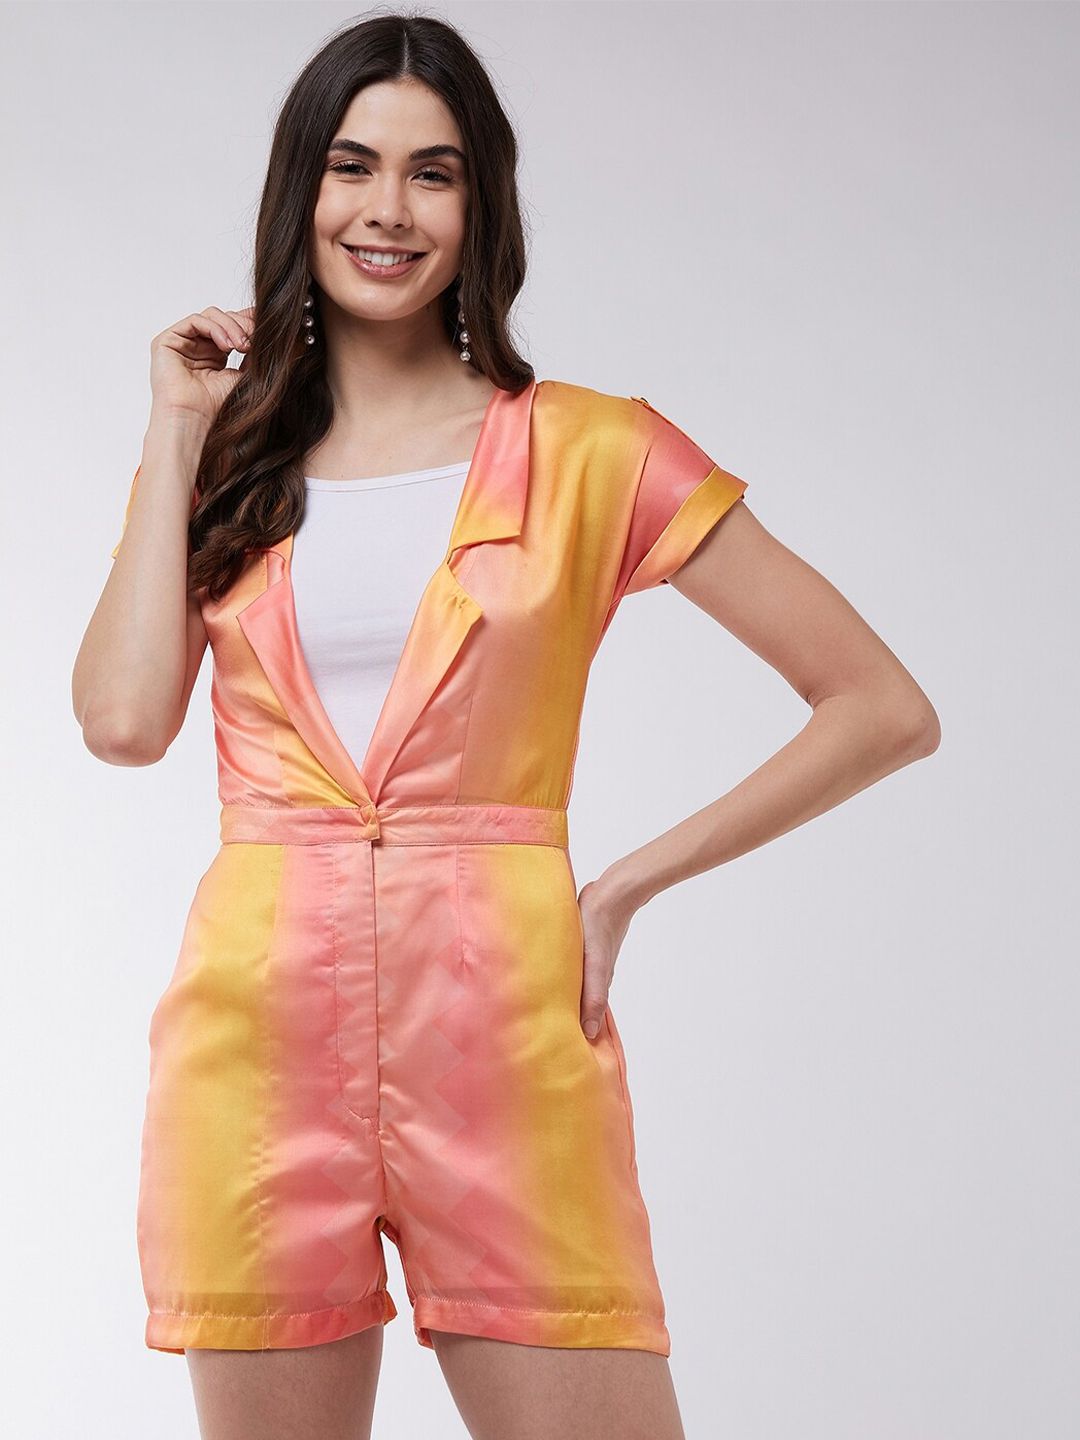 Zima Leto Women Peach-Coloured & Yellow Printed Playsuit Price in India